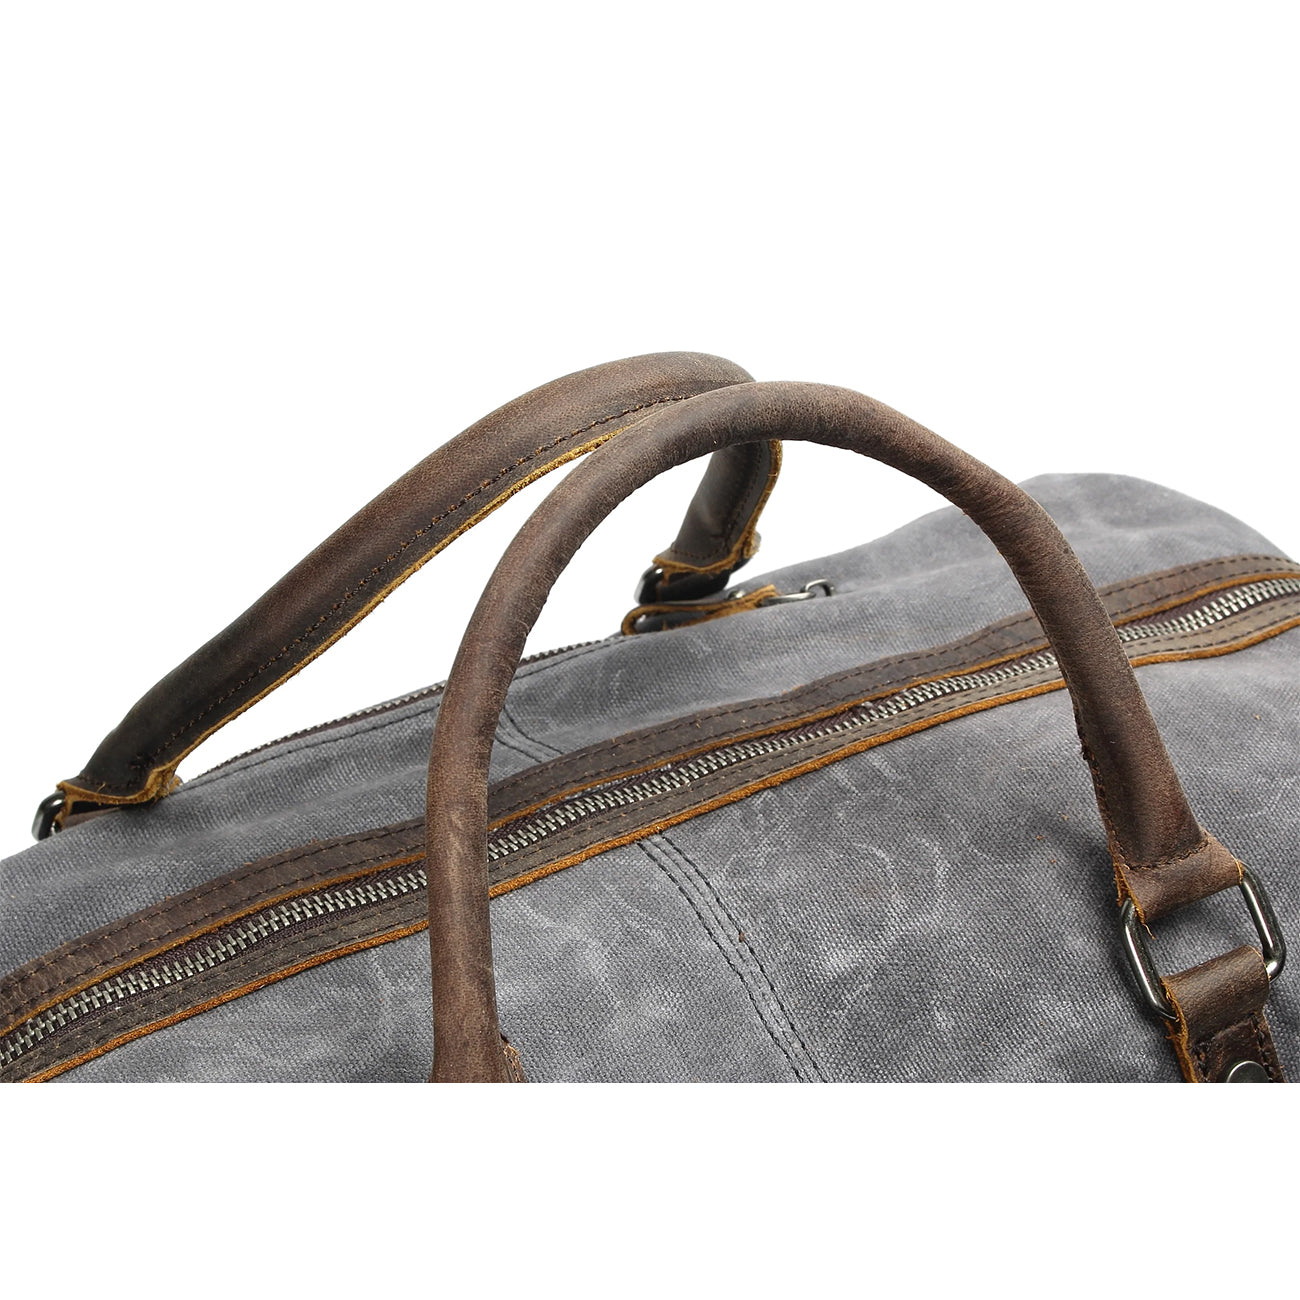 heavy canvas duffle bag with reinforced doubled leather handles